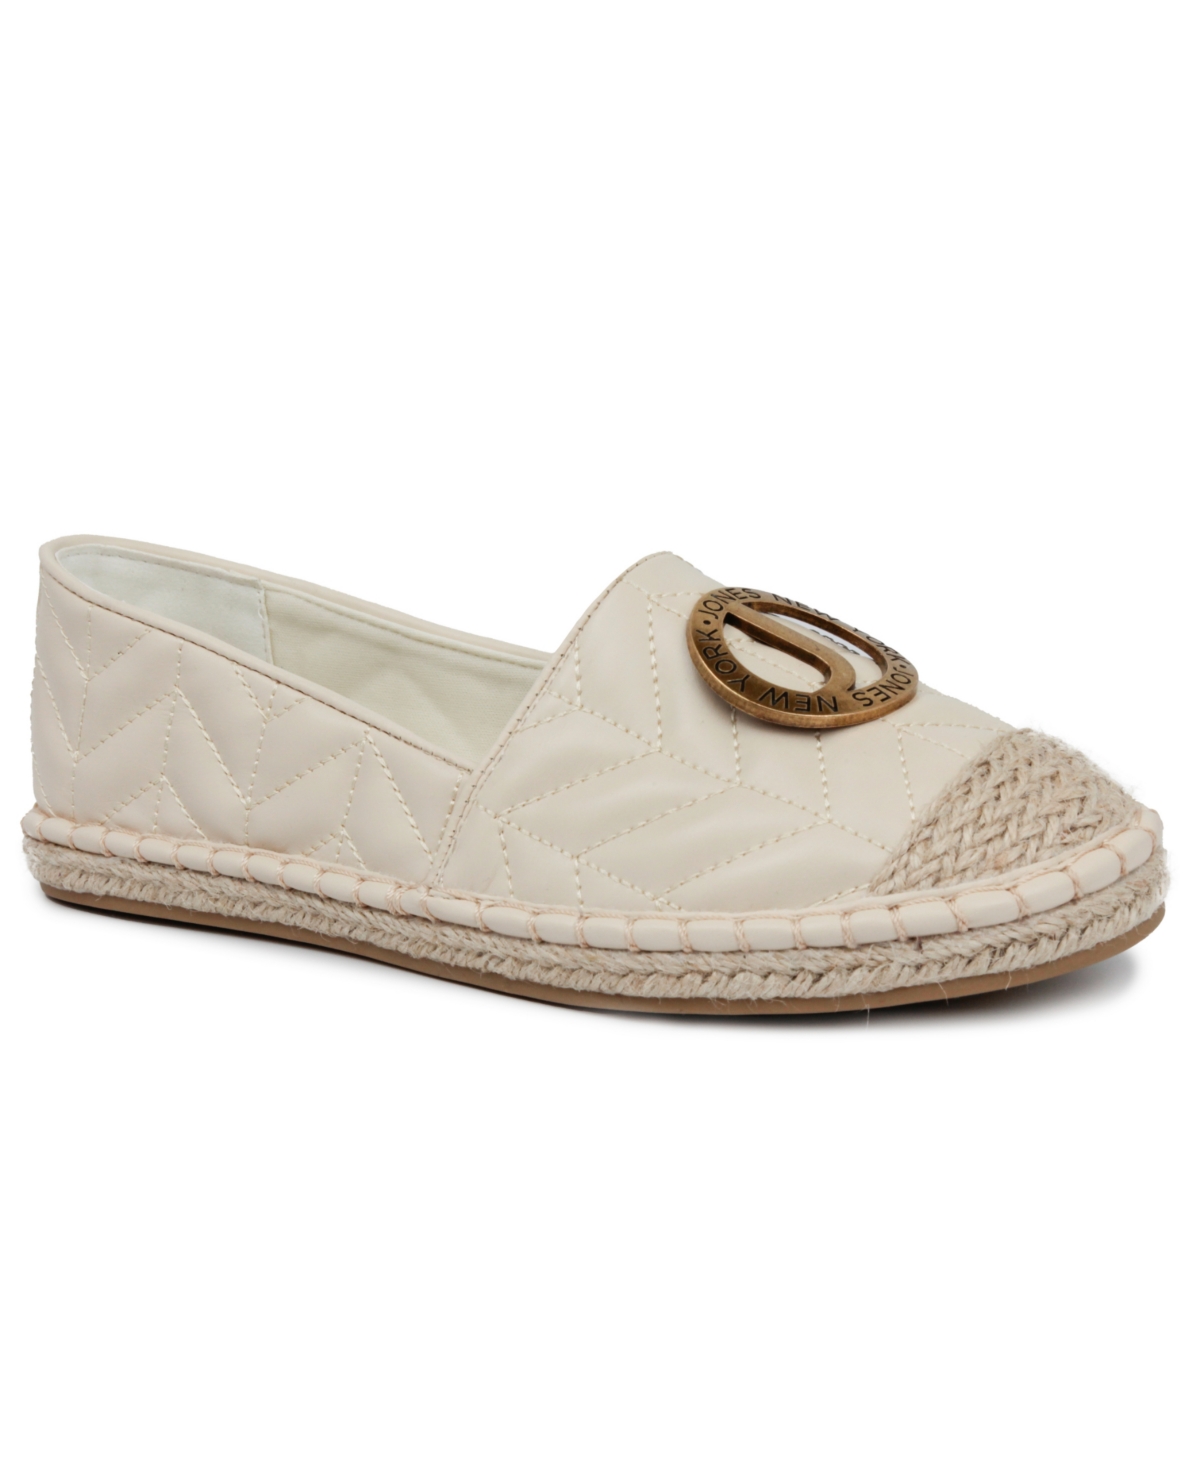 Women's Stana Quilted Espadrille Flat - Off White Polyurethane